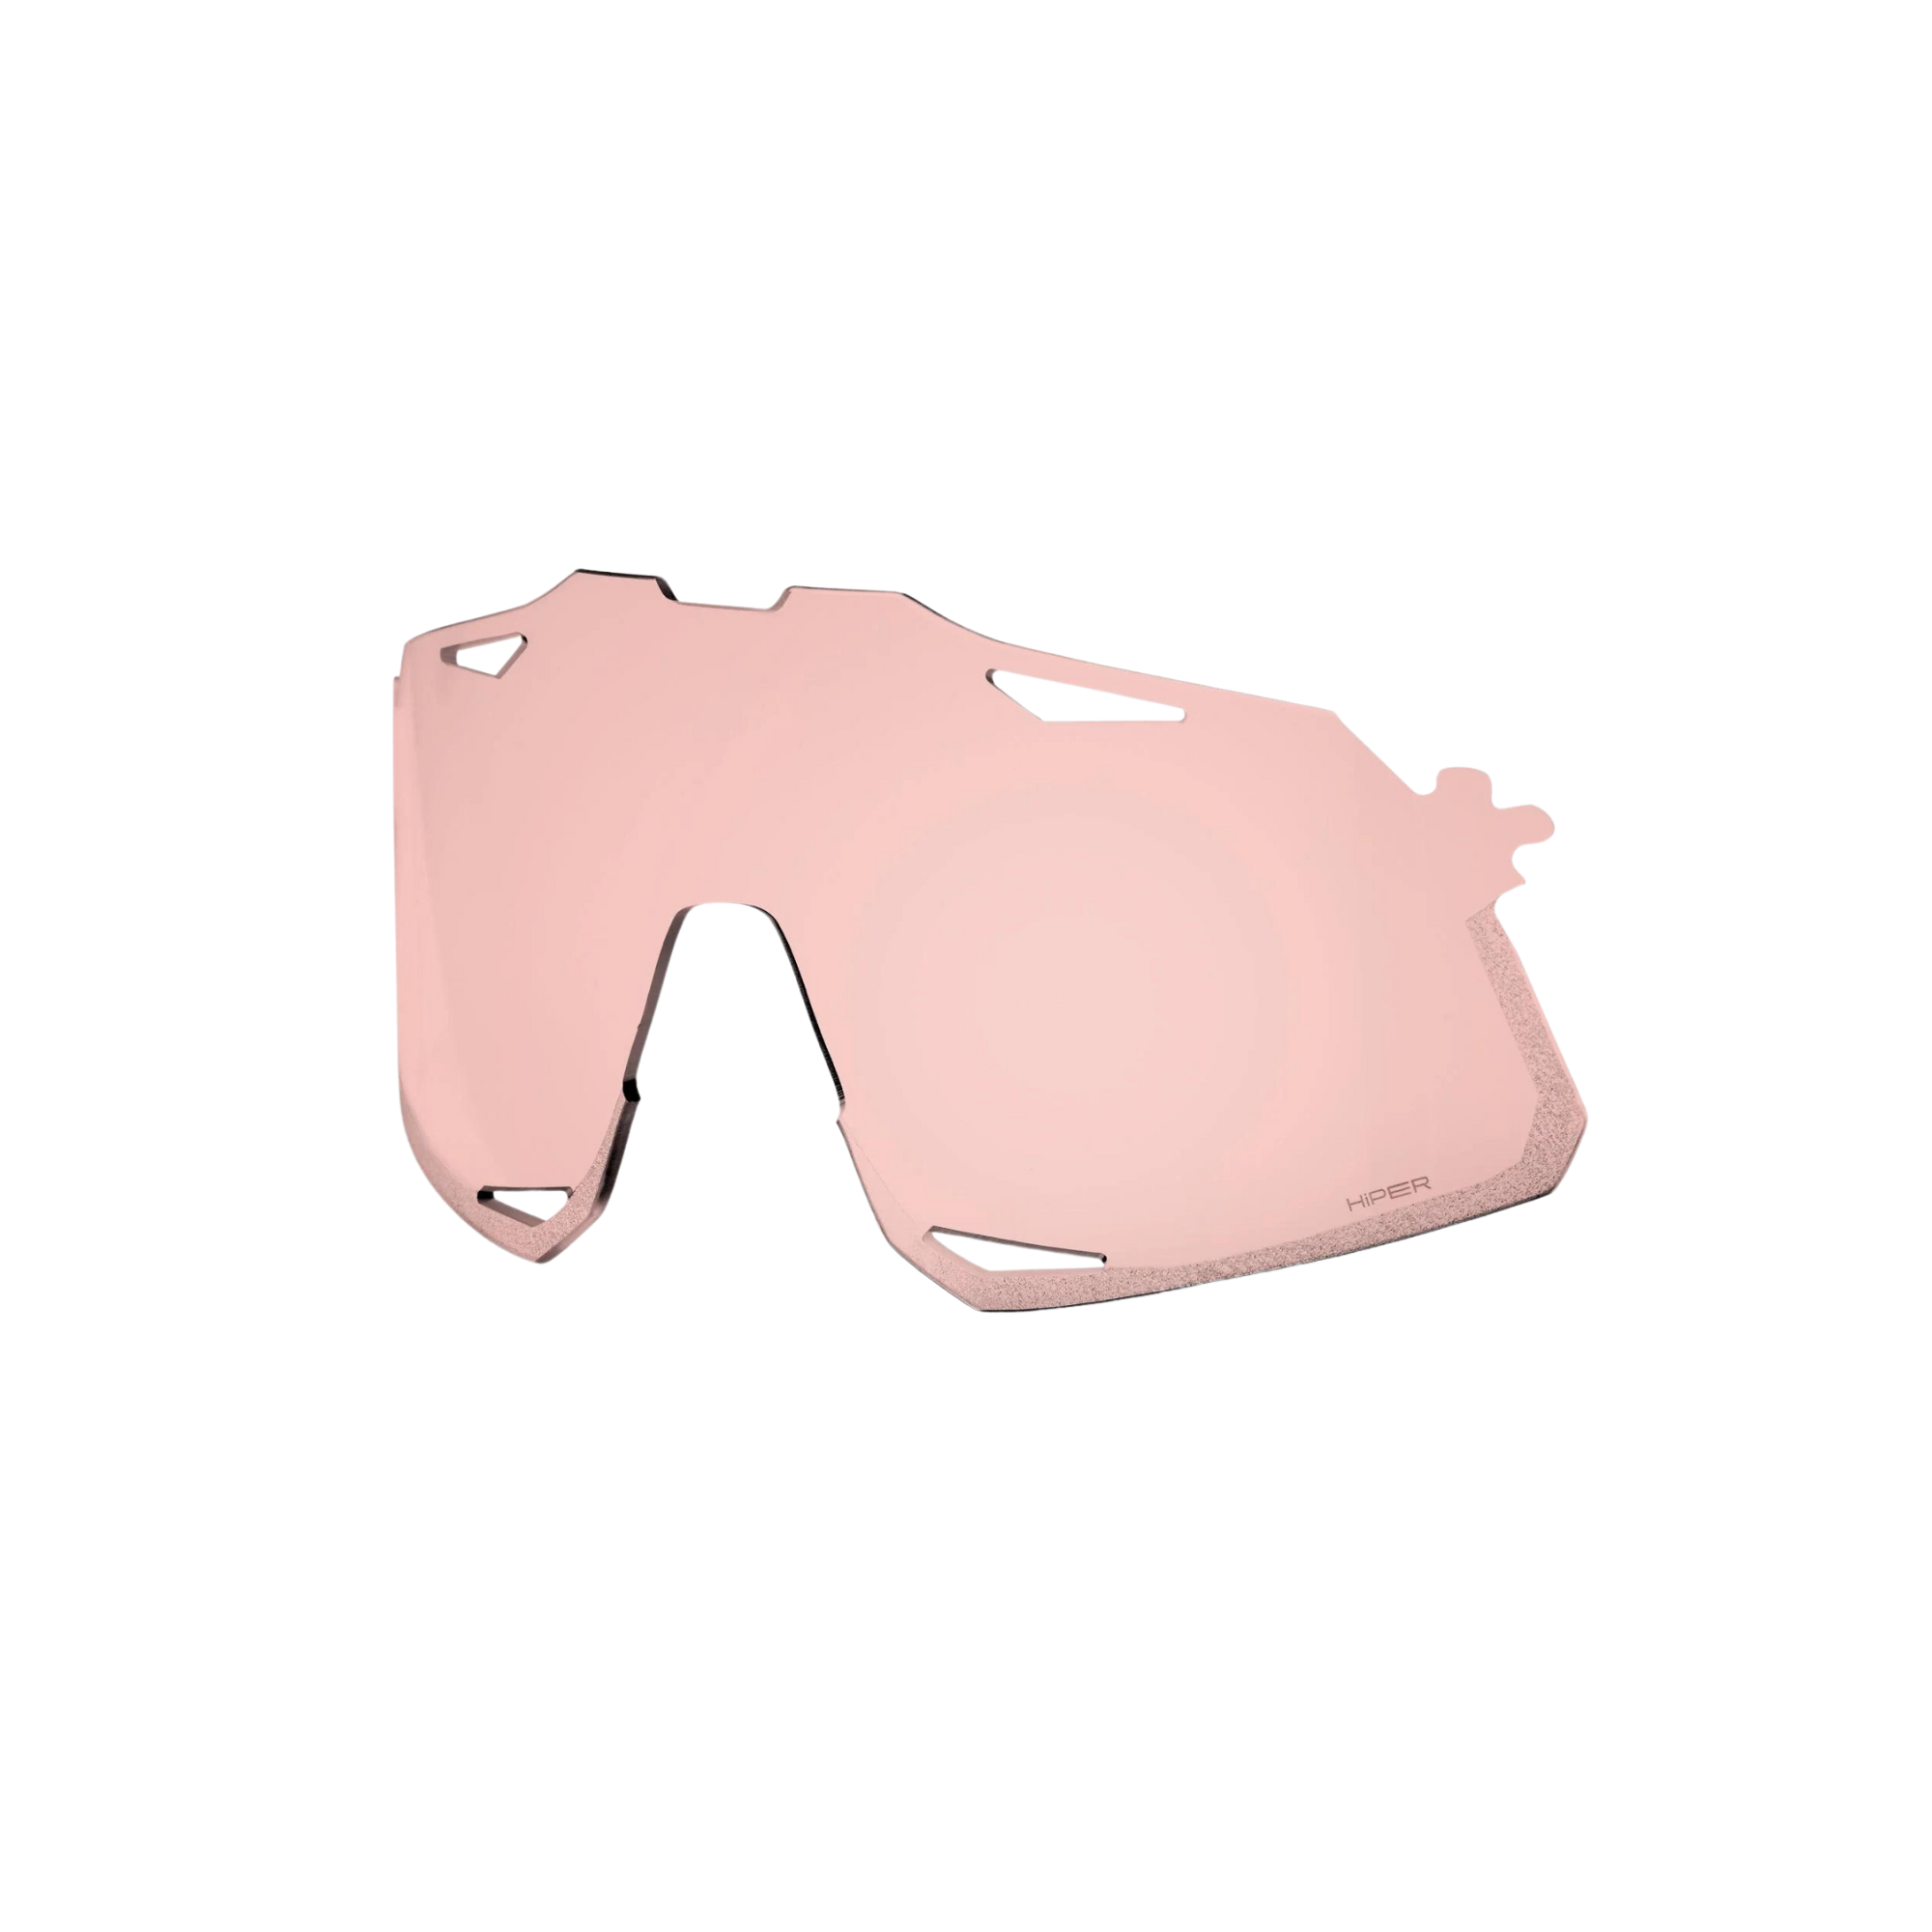 100% HYPERCRAFT Polycarbonate Replacement Lens - HiPER Coral